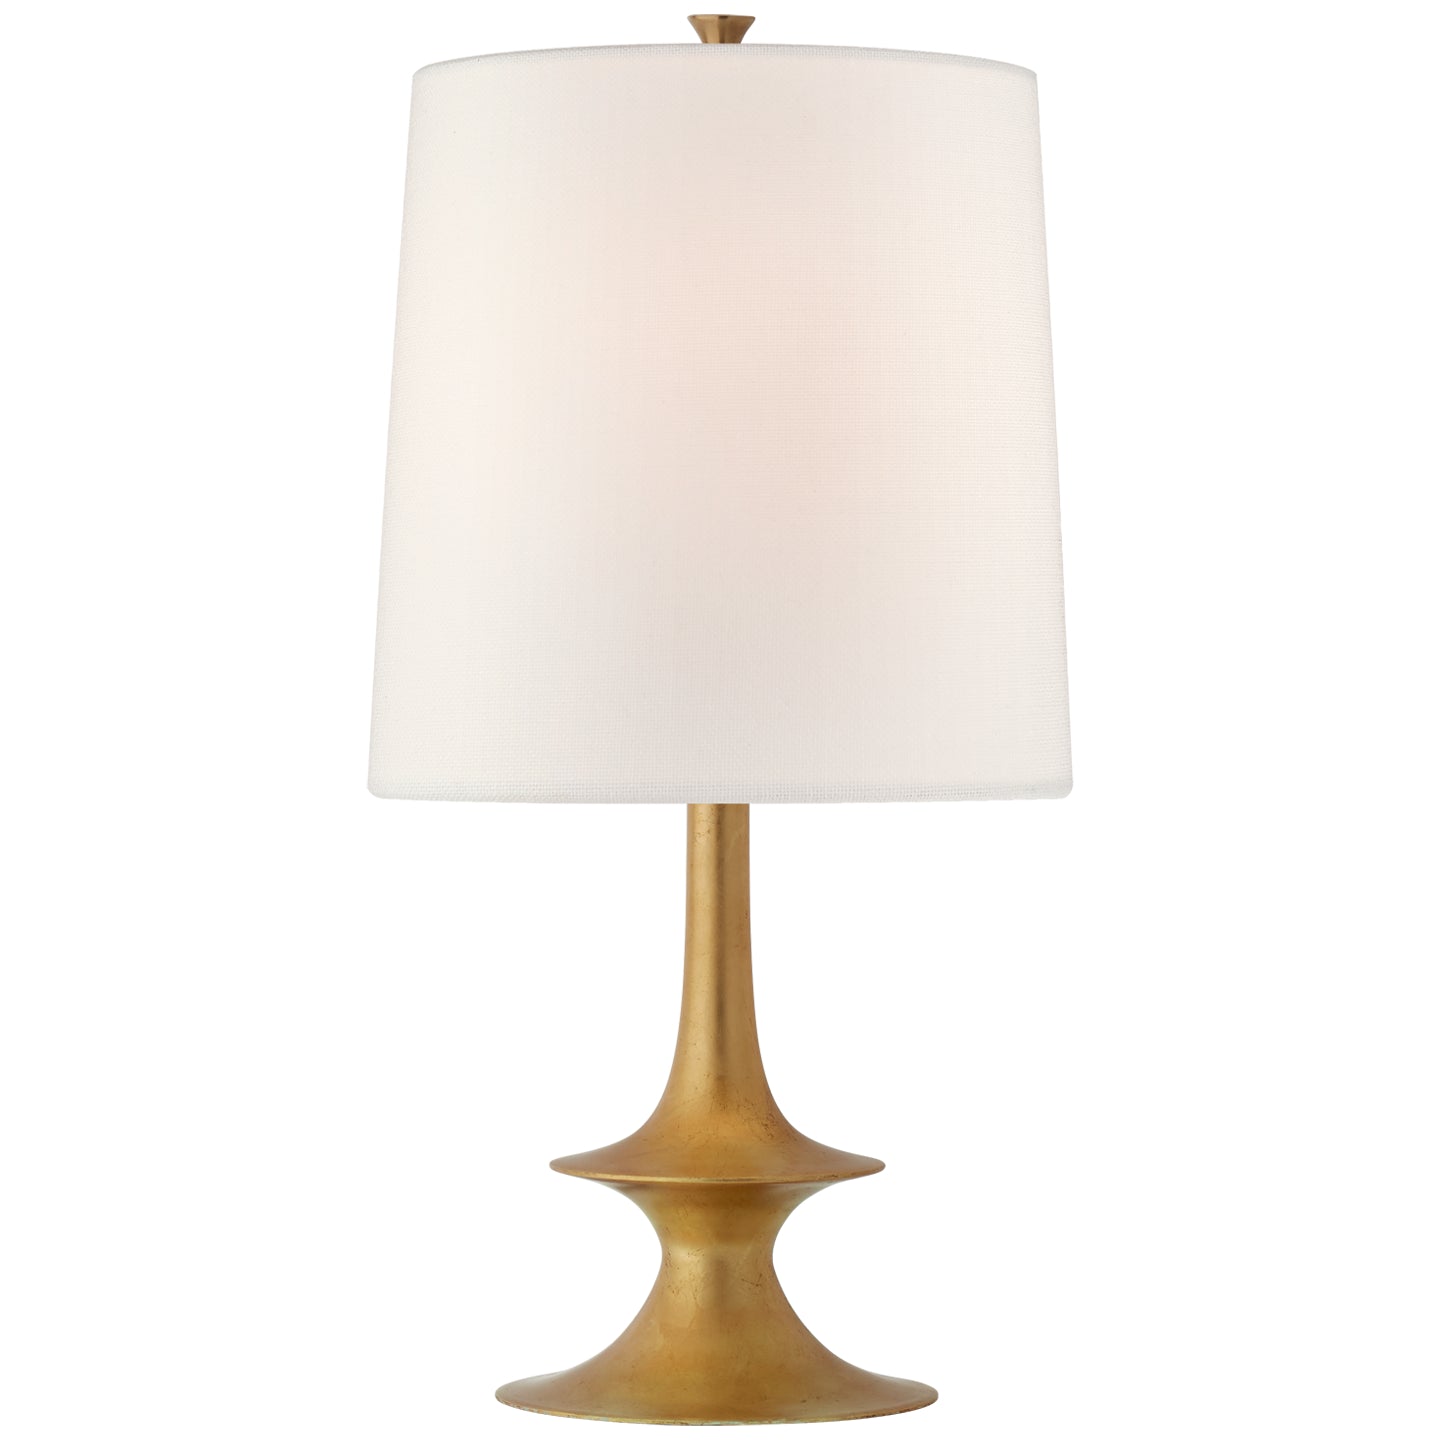 Load image into Gallery viewer, Visual Comfort Signature - ARN 3323G-L - One Light Table Lamp - Lakmos - Gild
